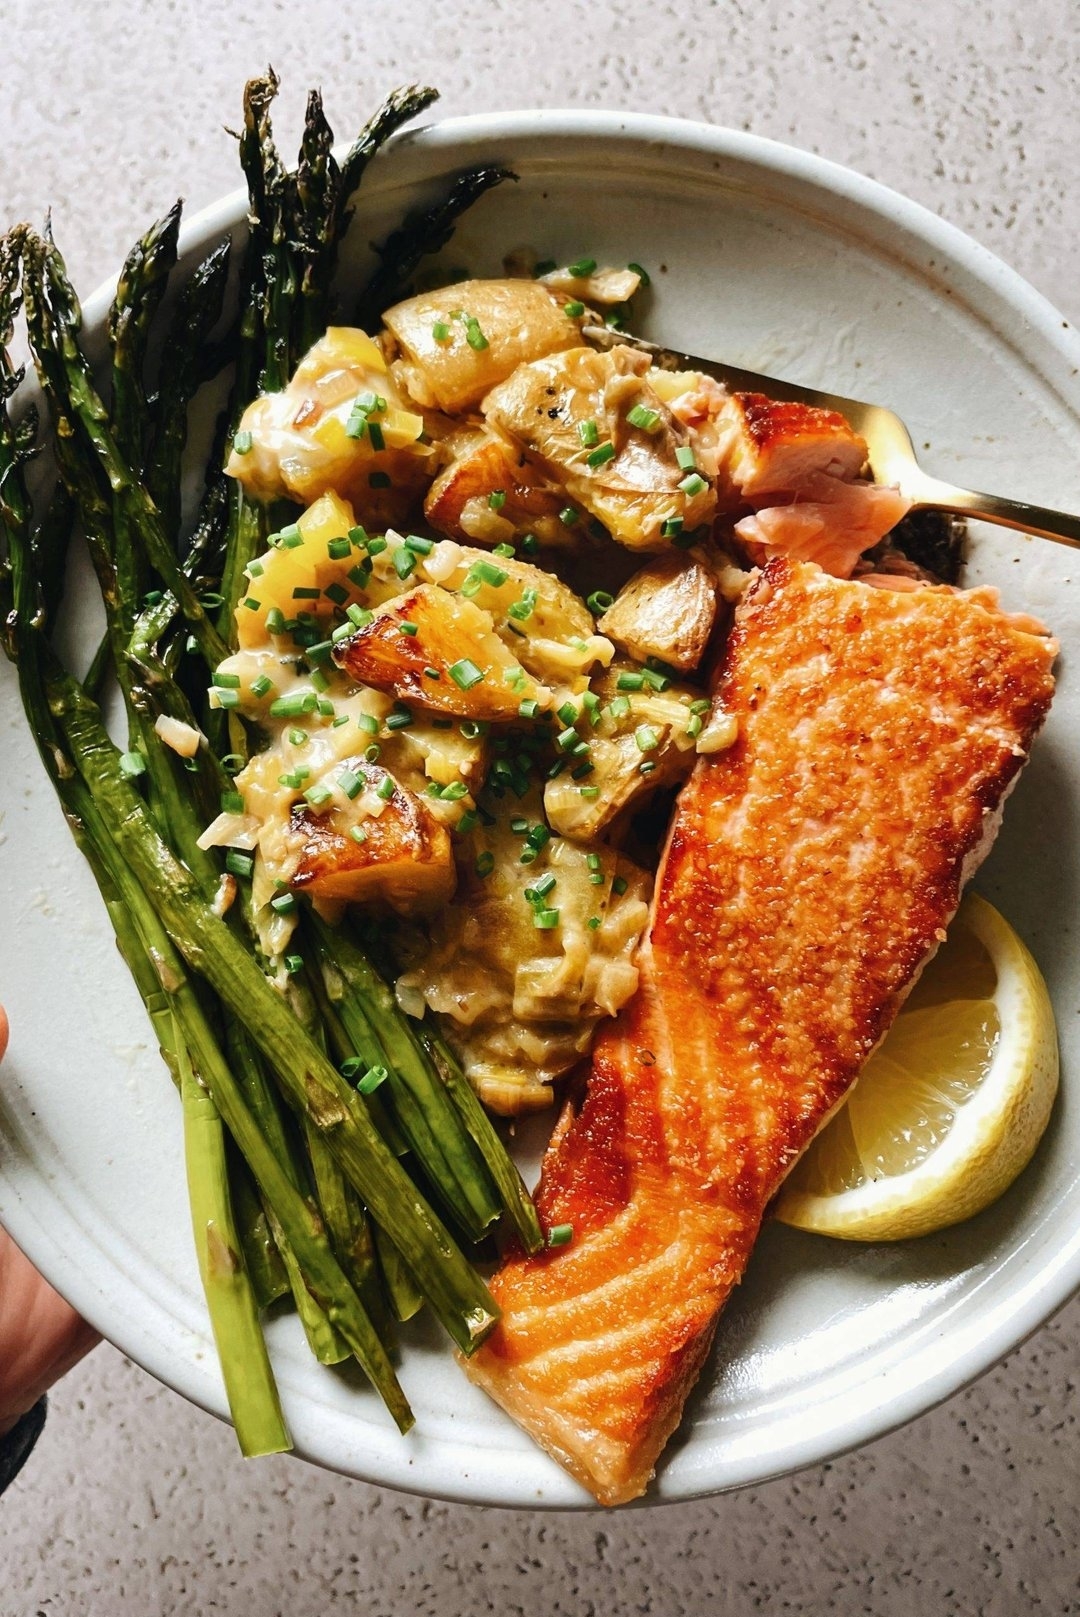 Grilled salmon and asparagus on a plate with lemon wedge and sauce